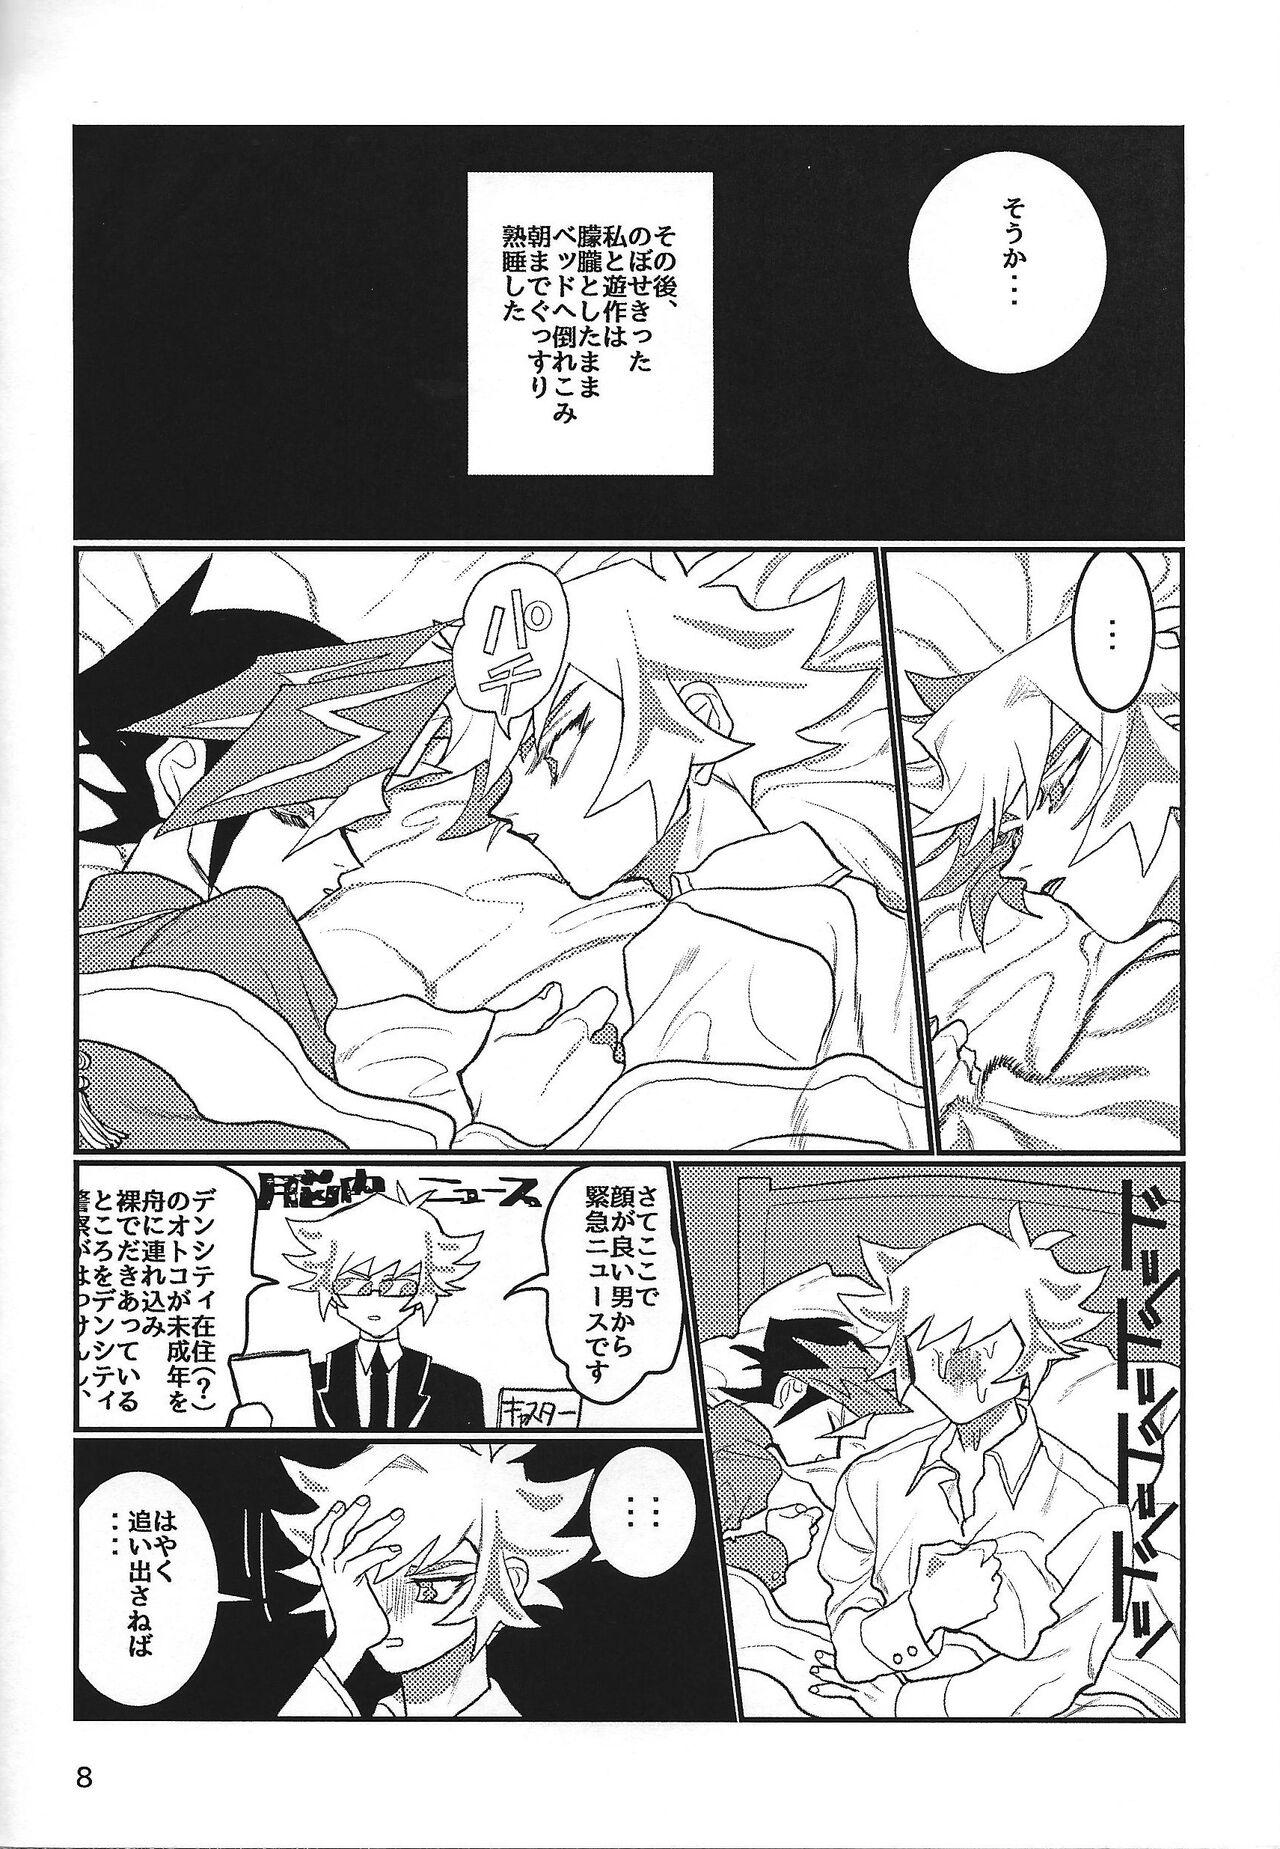 Top LOTUS - Yu-gi-oh vrains Domination - Page 9